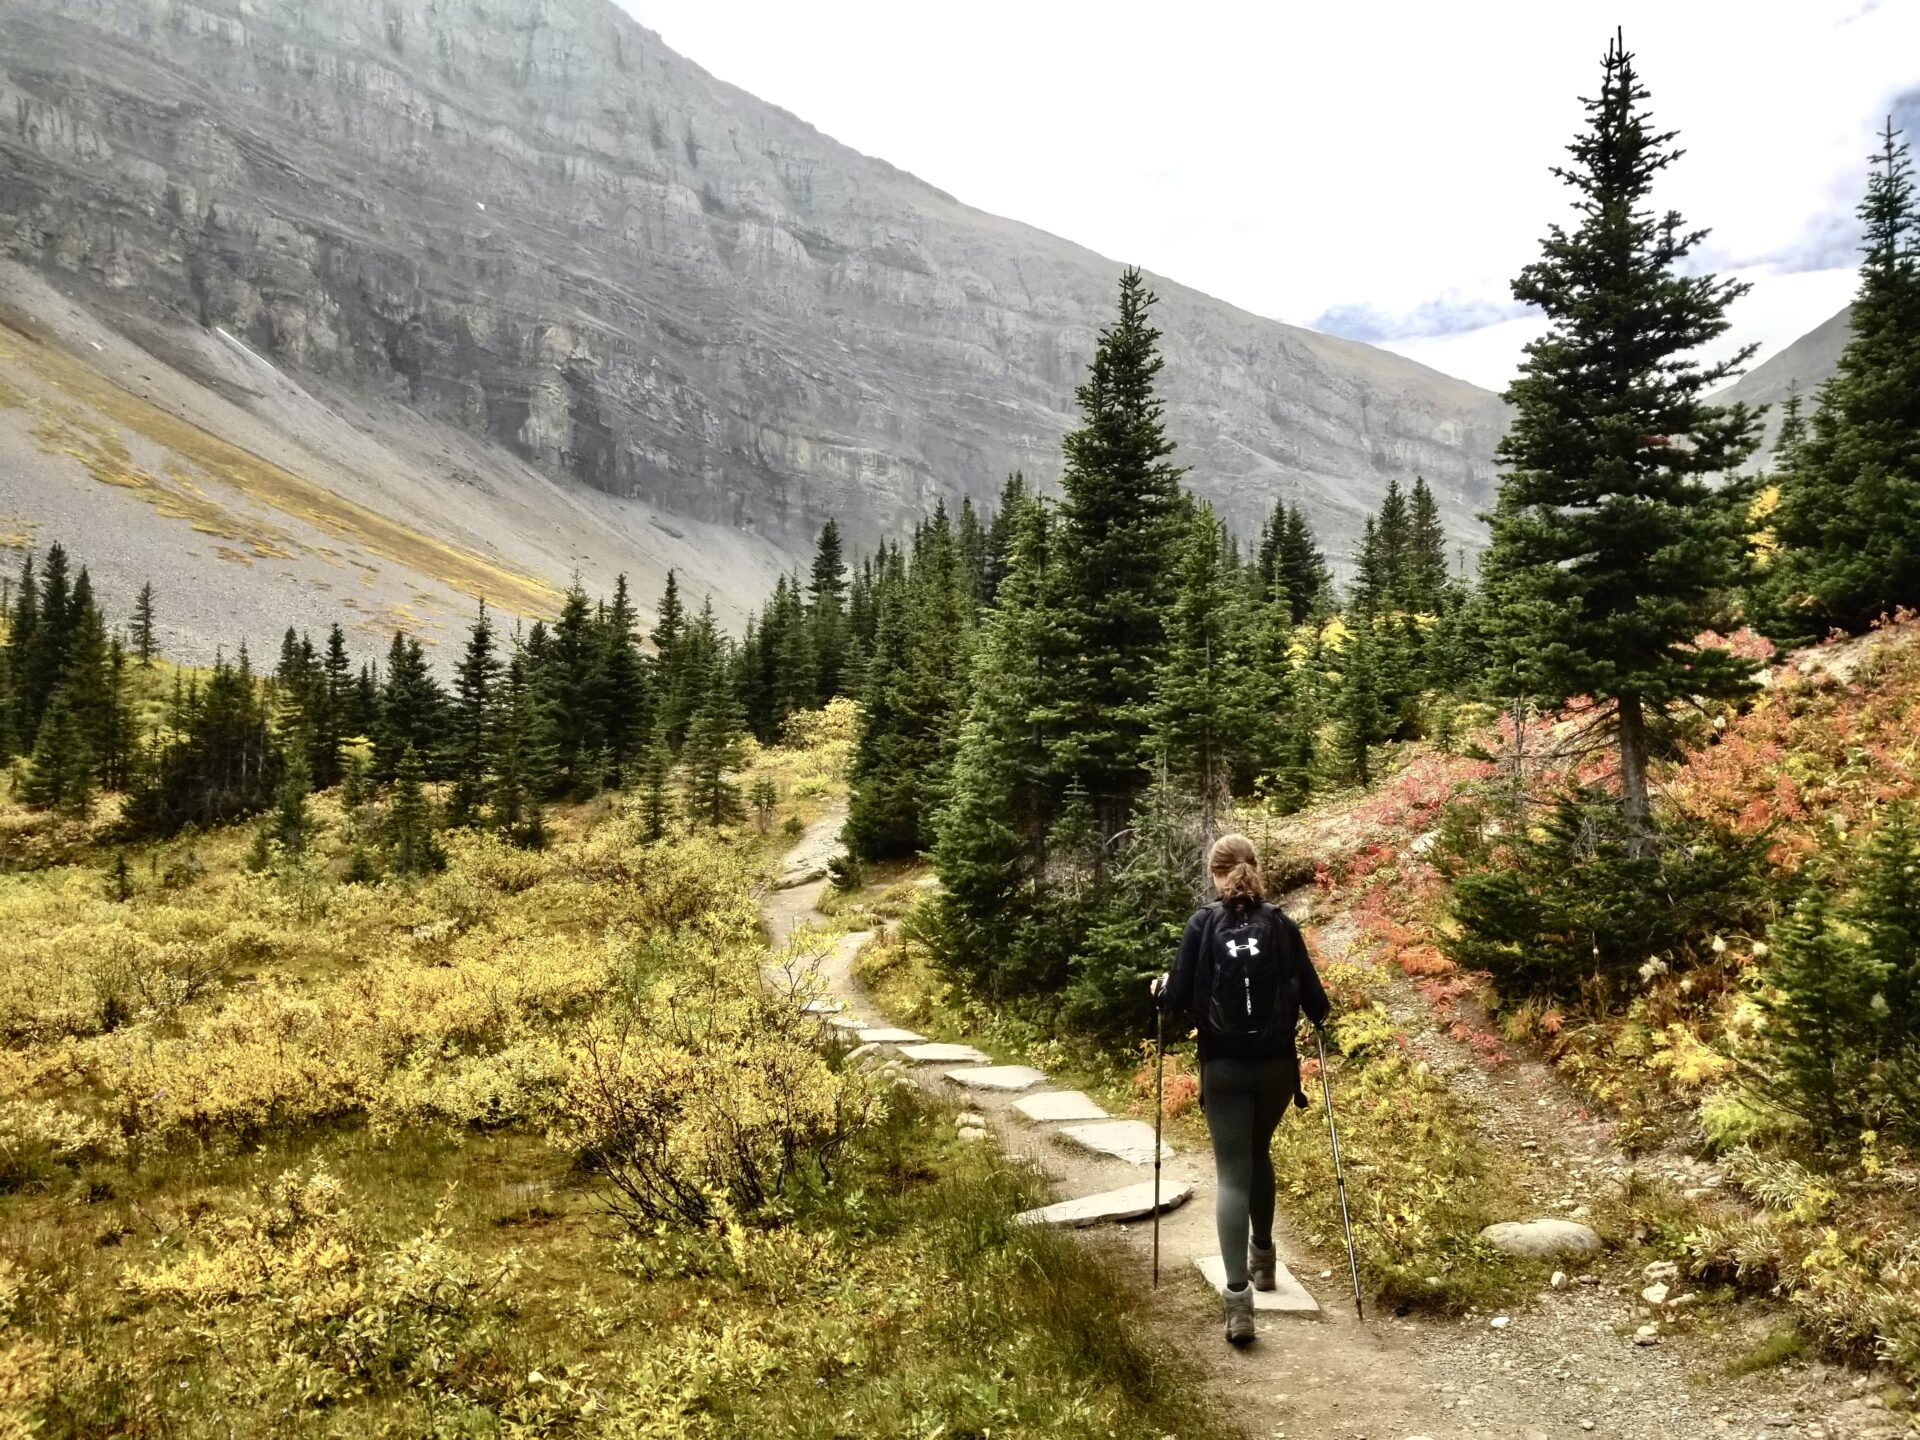 Things to do in Banff, Mount Bourgeau summit hike in Banff